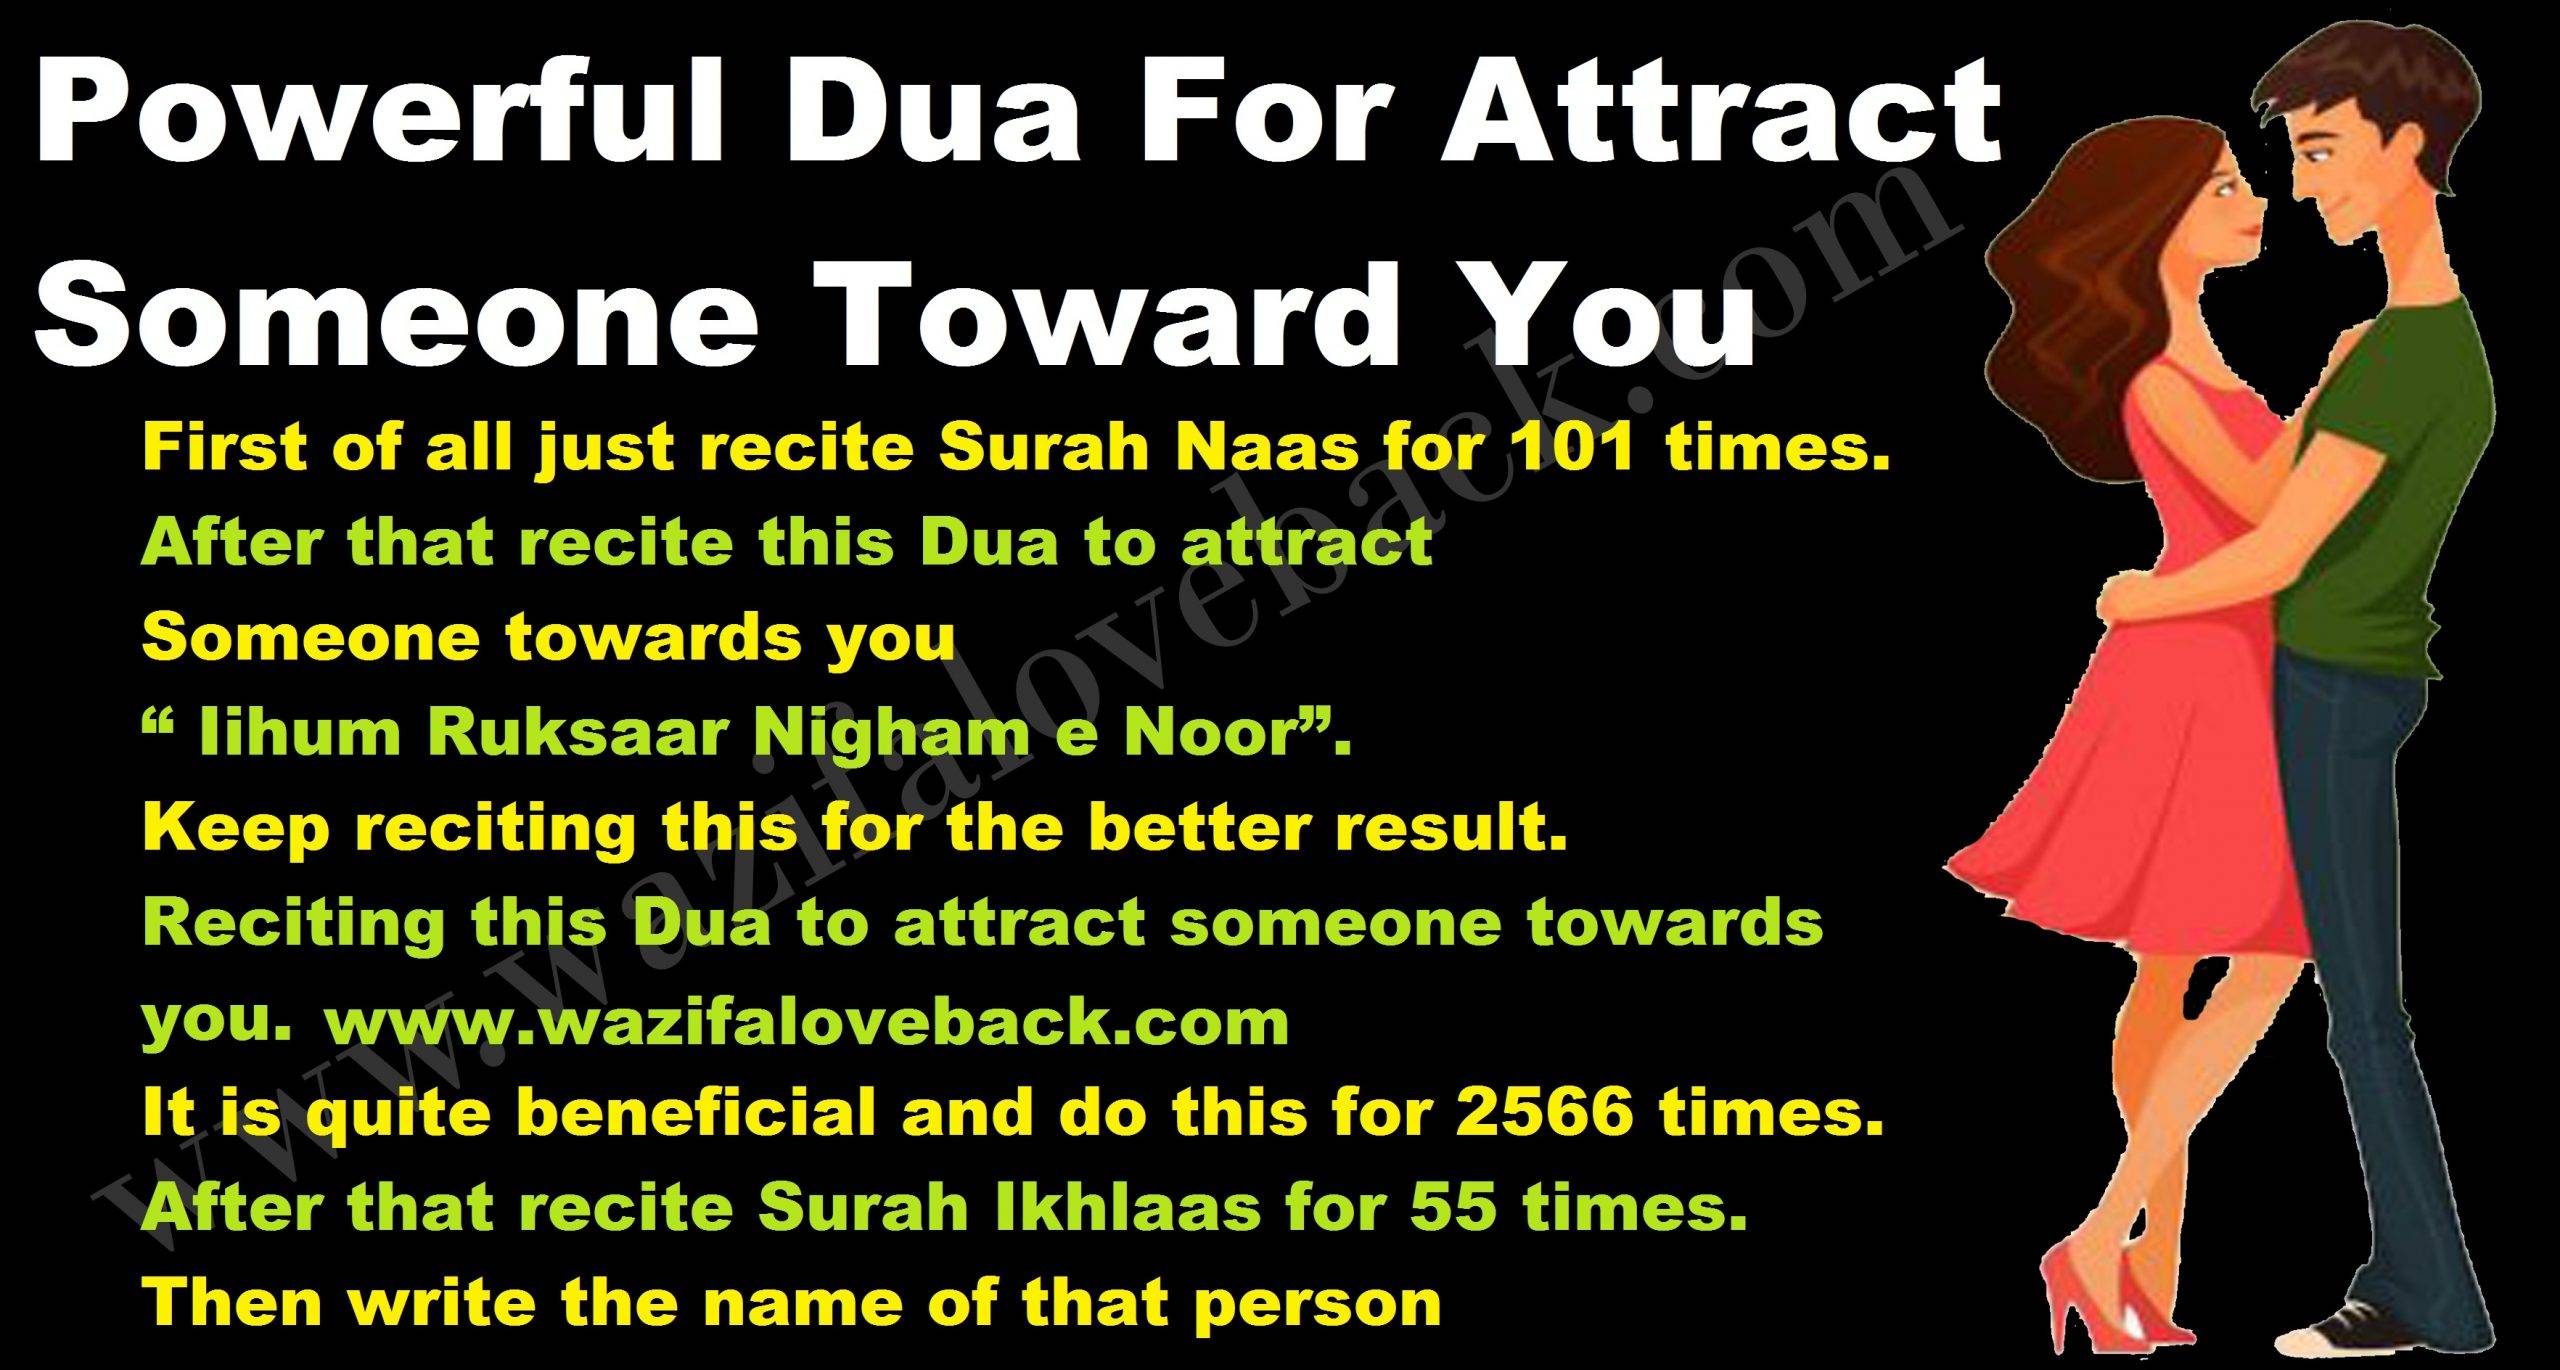 Powerful Dua For Attract Someone Toward You